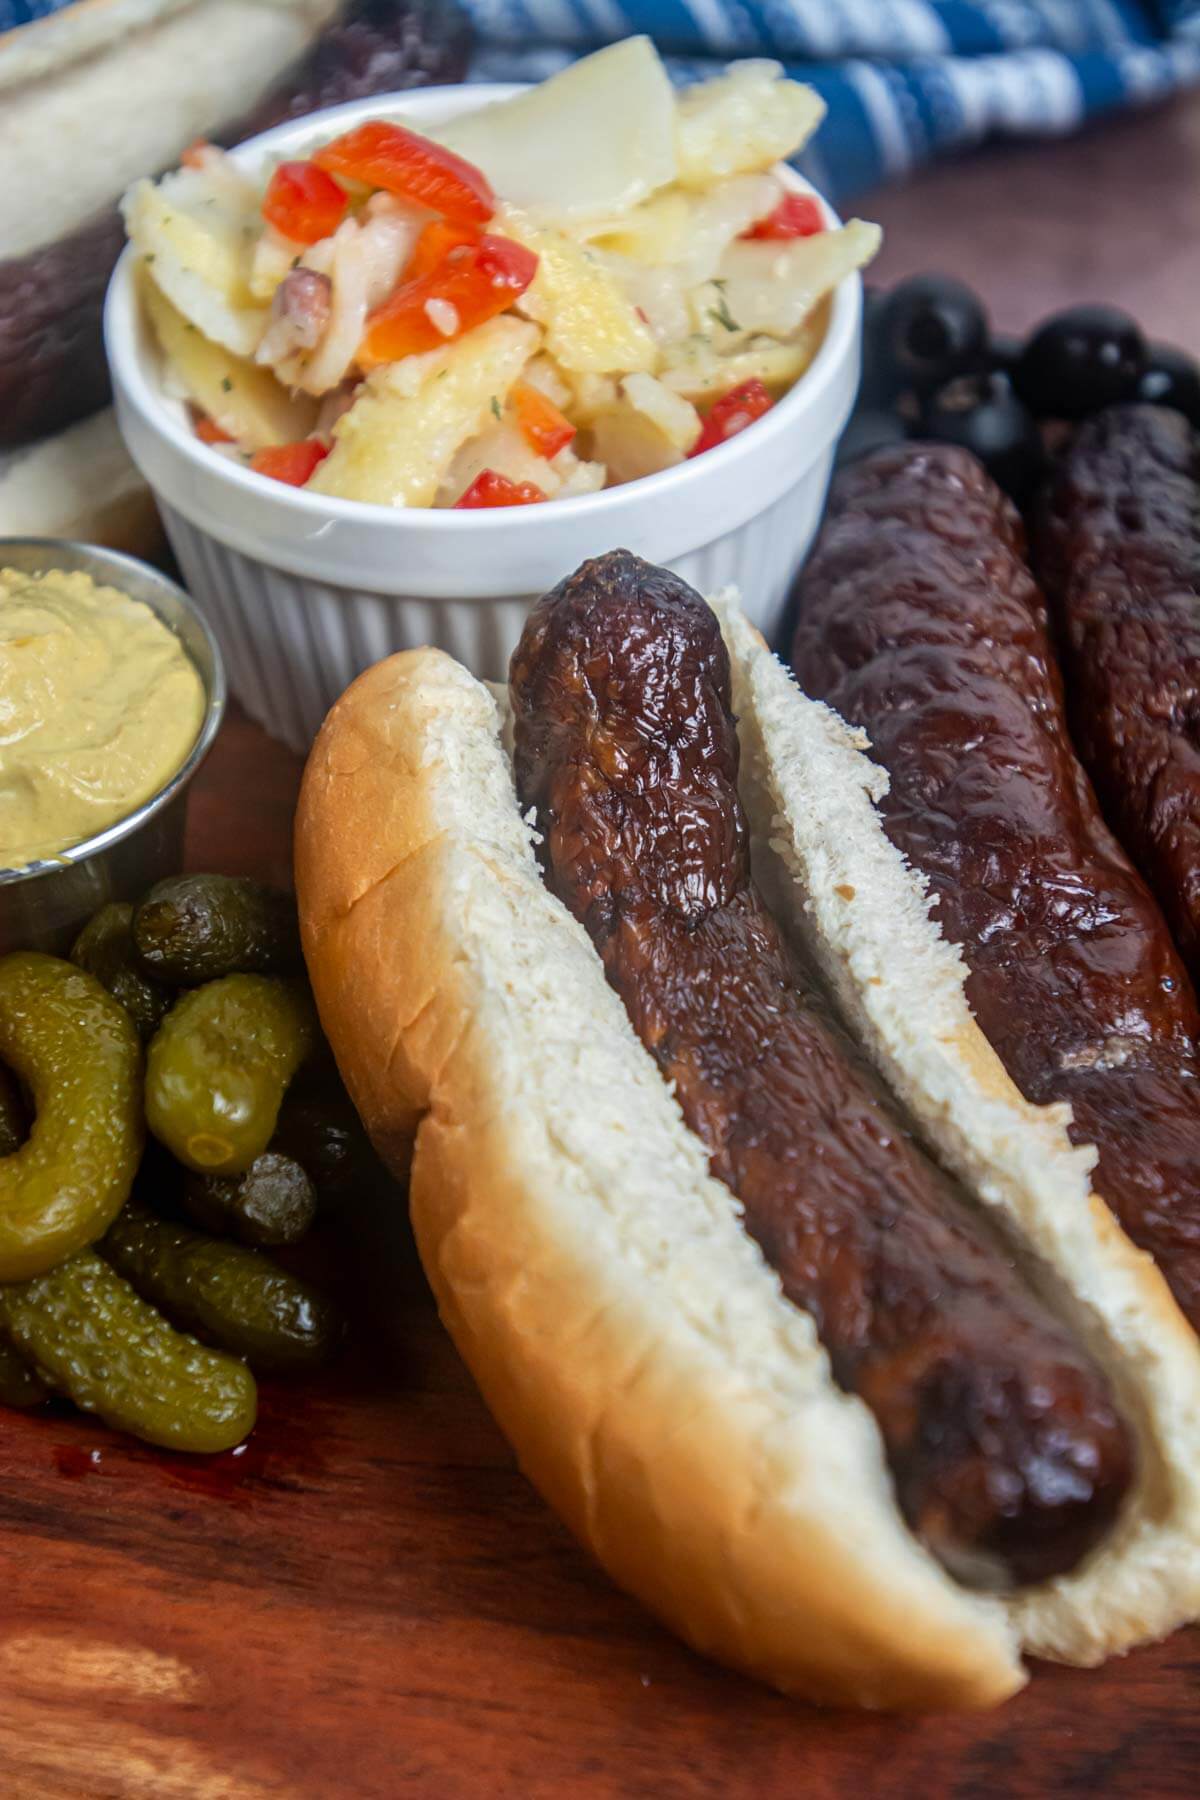 smoked sausage in a bun with mustard, pickles and potato salad.